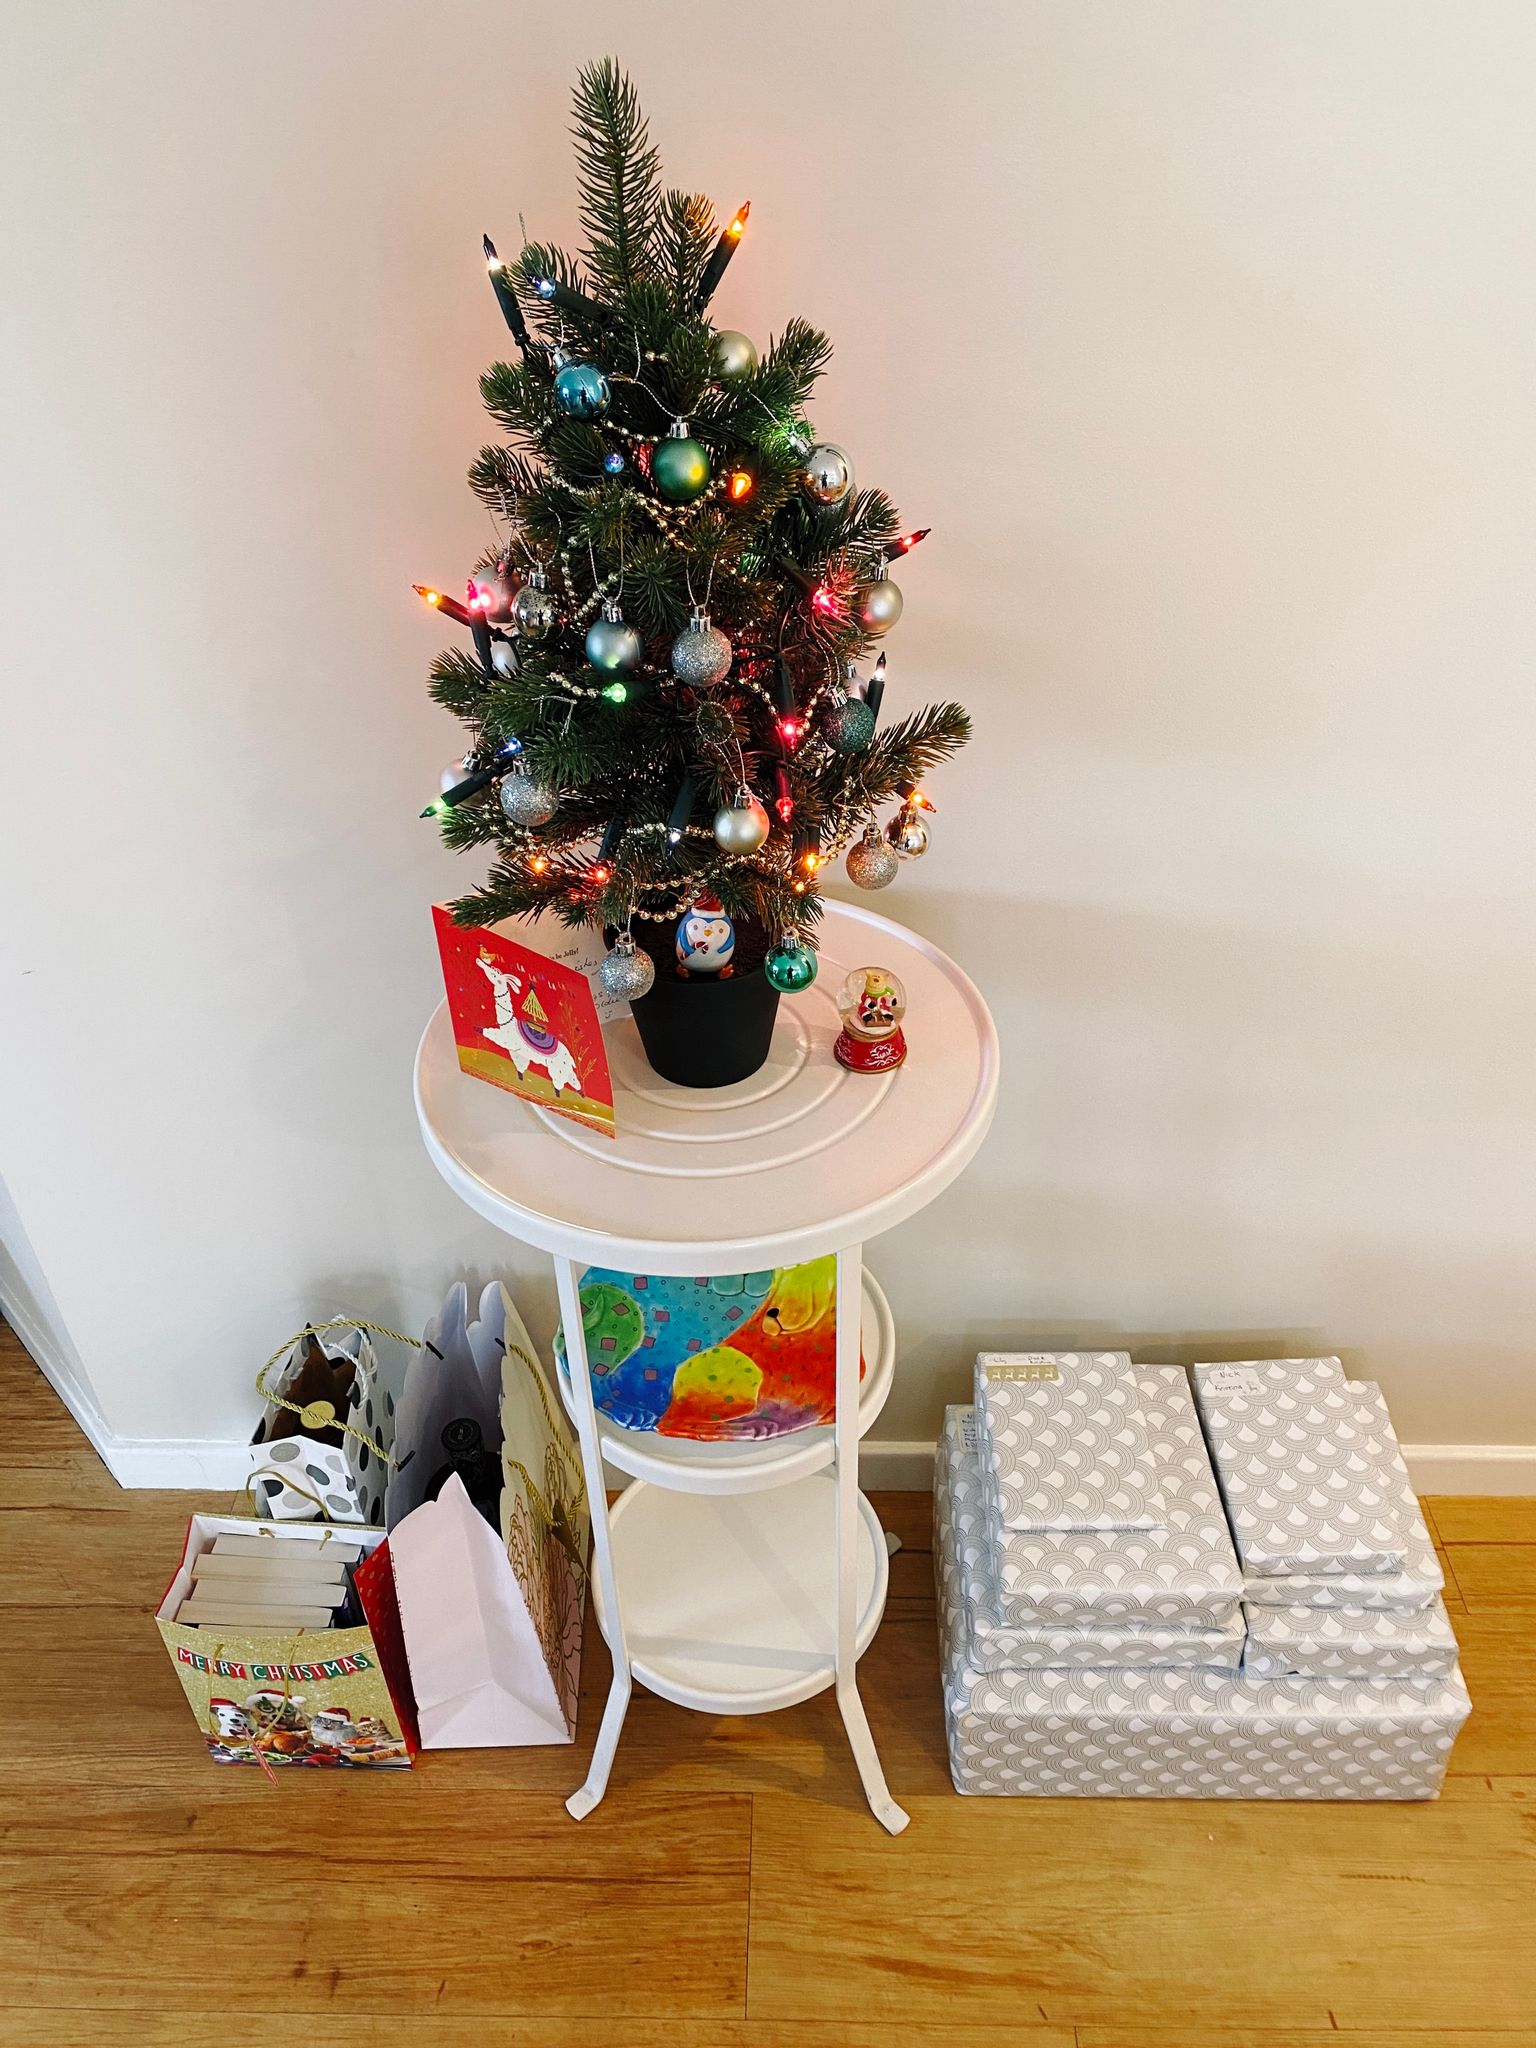 A photo of a small selection of wrapped presents at the base of a white pedestal/stand that has a small decorated Christmas tree on top of it.